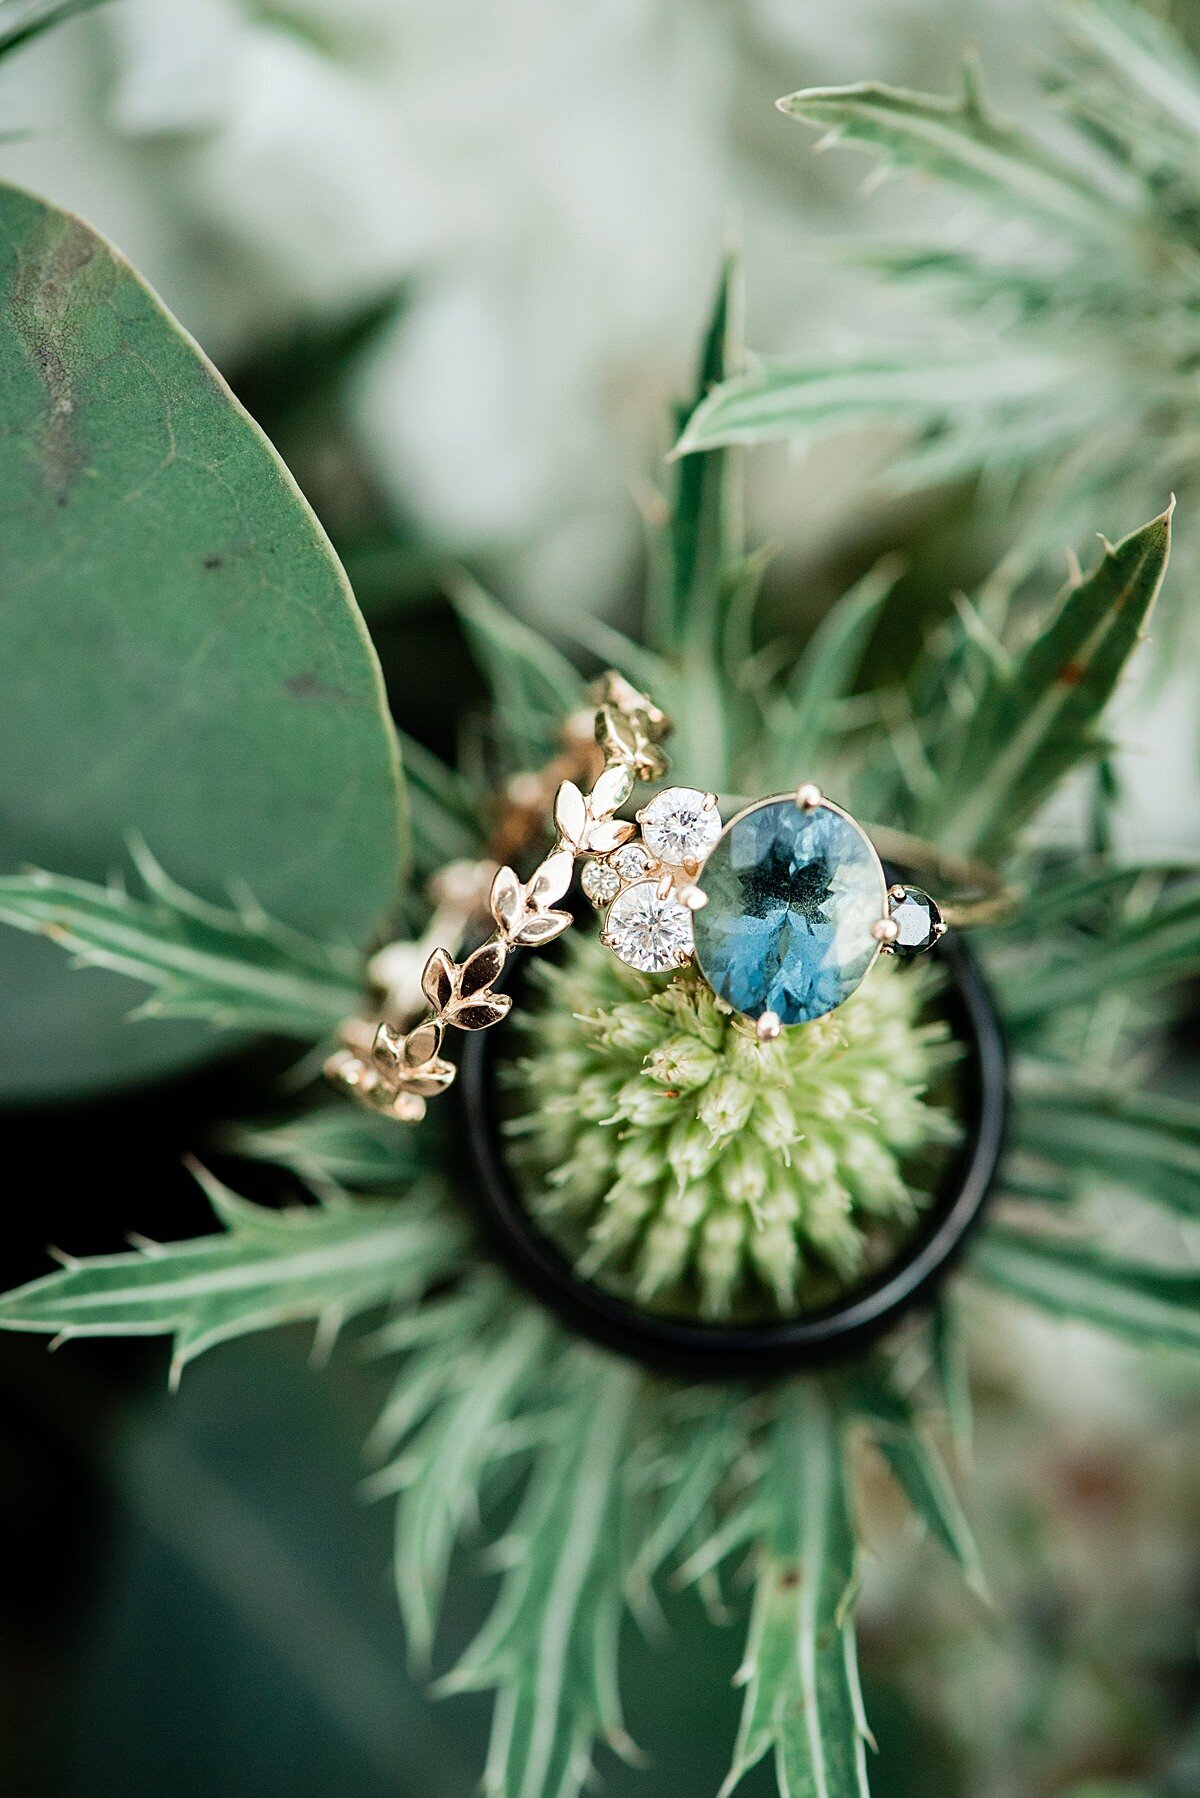 Nestled in the center of a green thistle is the groom's black wedding band. On top that is the bride's blue sapphire engagement ring with small diamond accents and her gold wedding band with a vine leaf pattern.